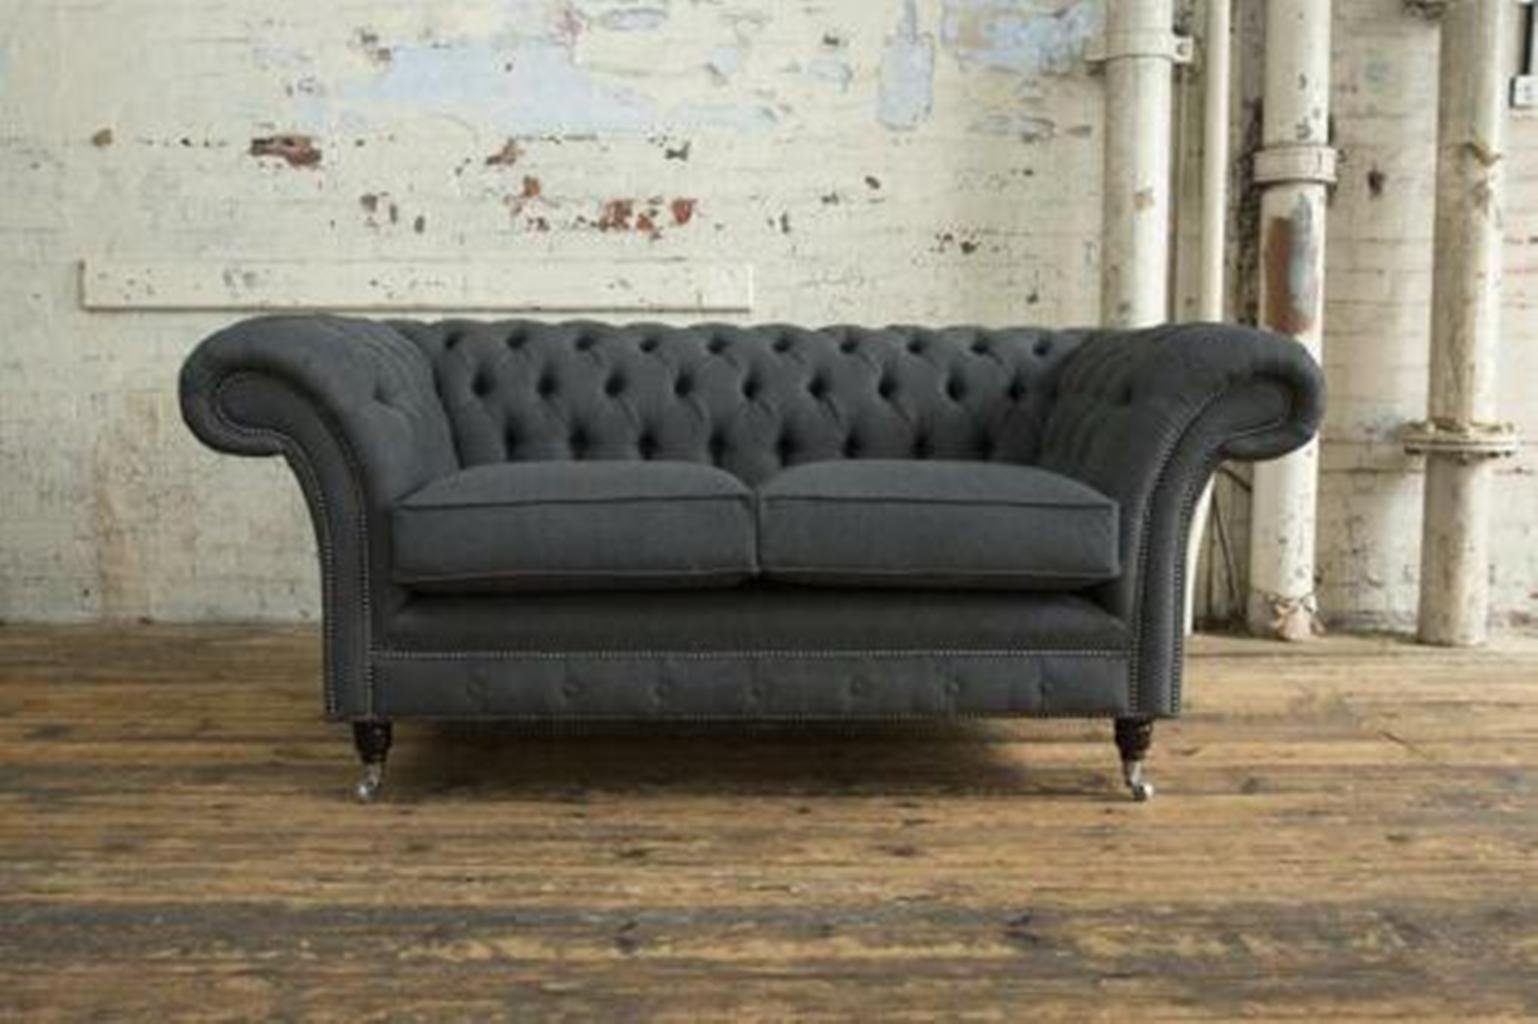 JVmoebel Chesterfield-Sofa, Luxus 2 Sitzer Couch Polster Sofa Textil Stoff Couchen Chesterfield